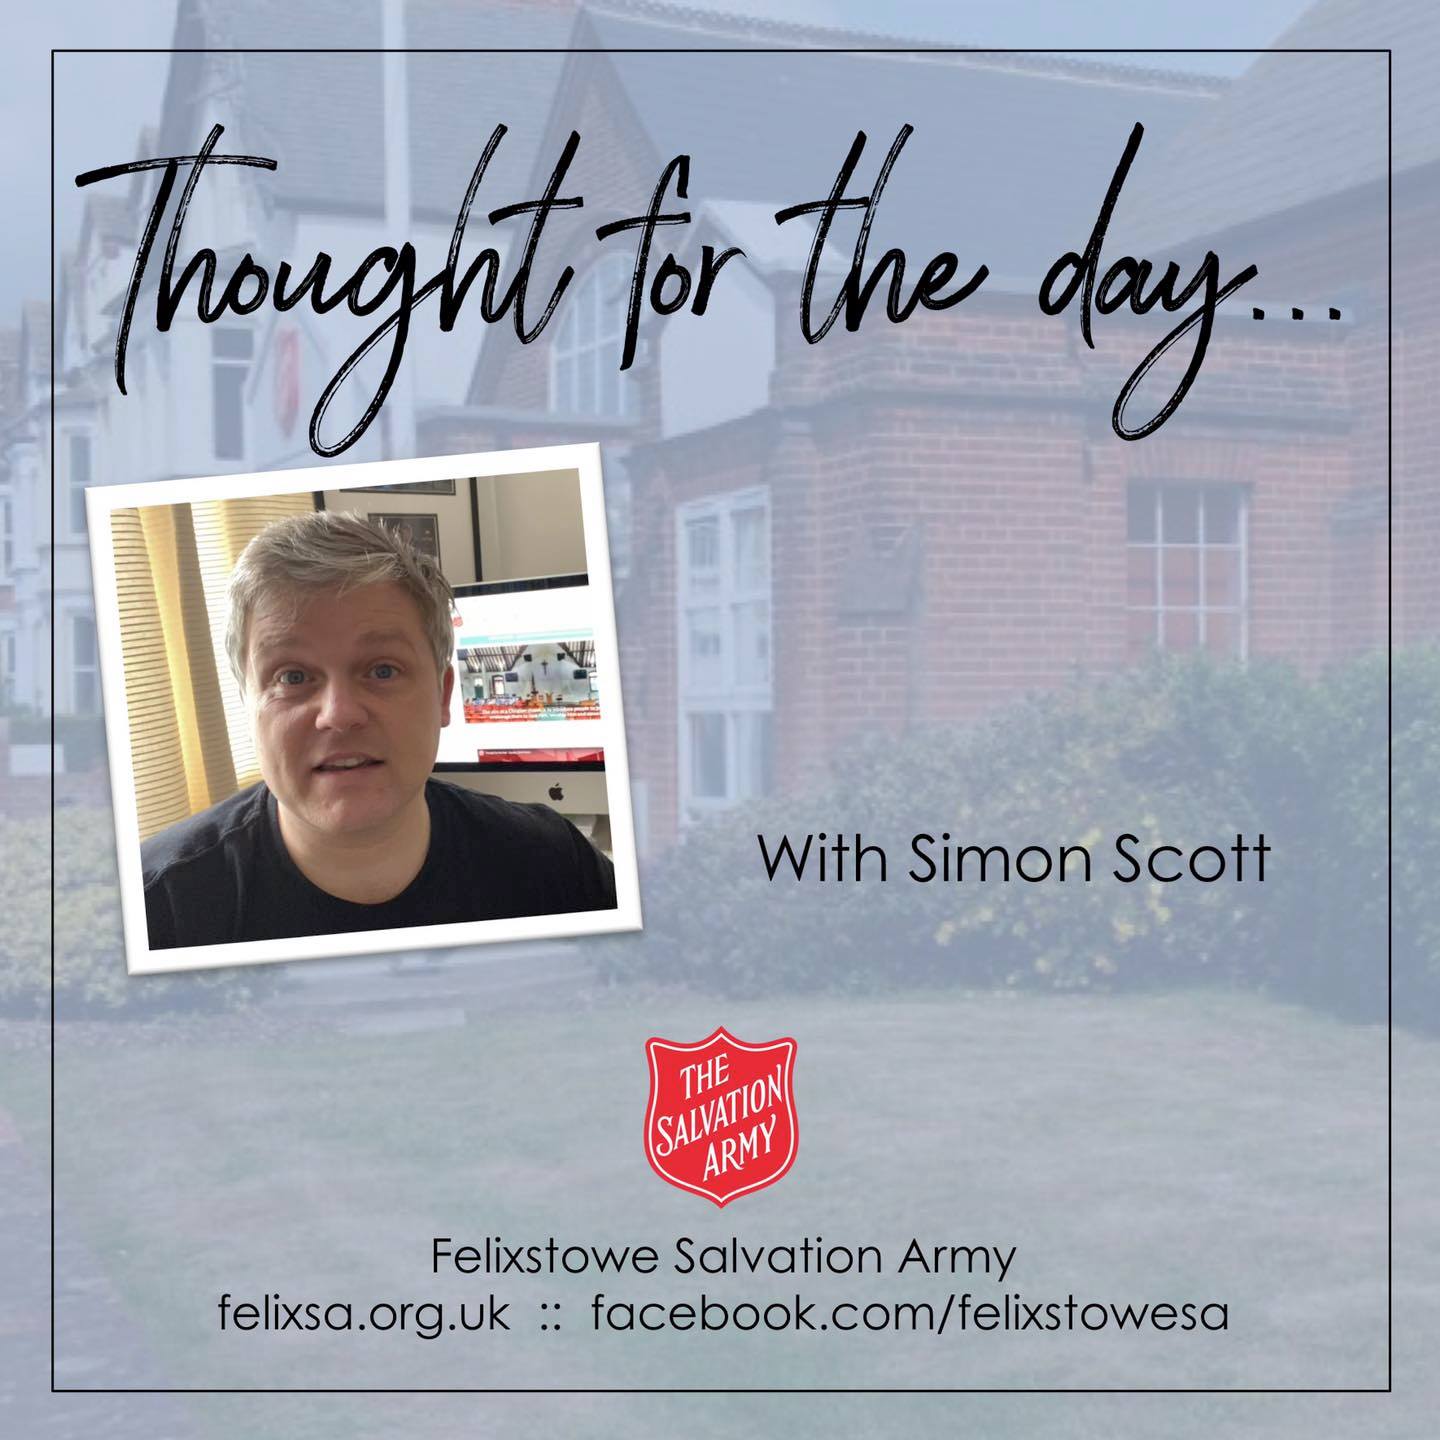 Thought for the Day with Simon Scott